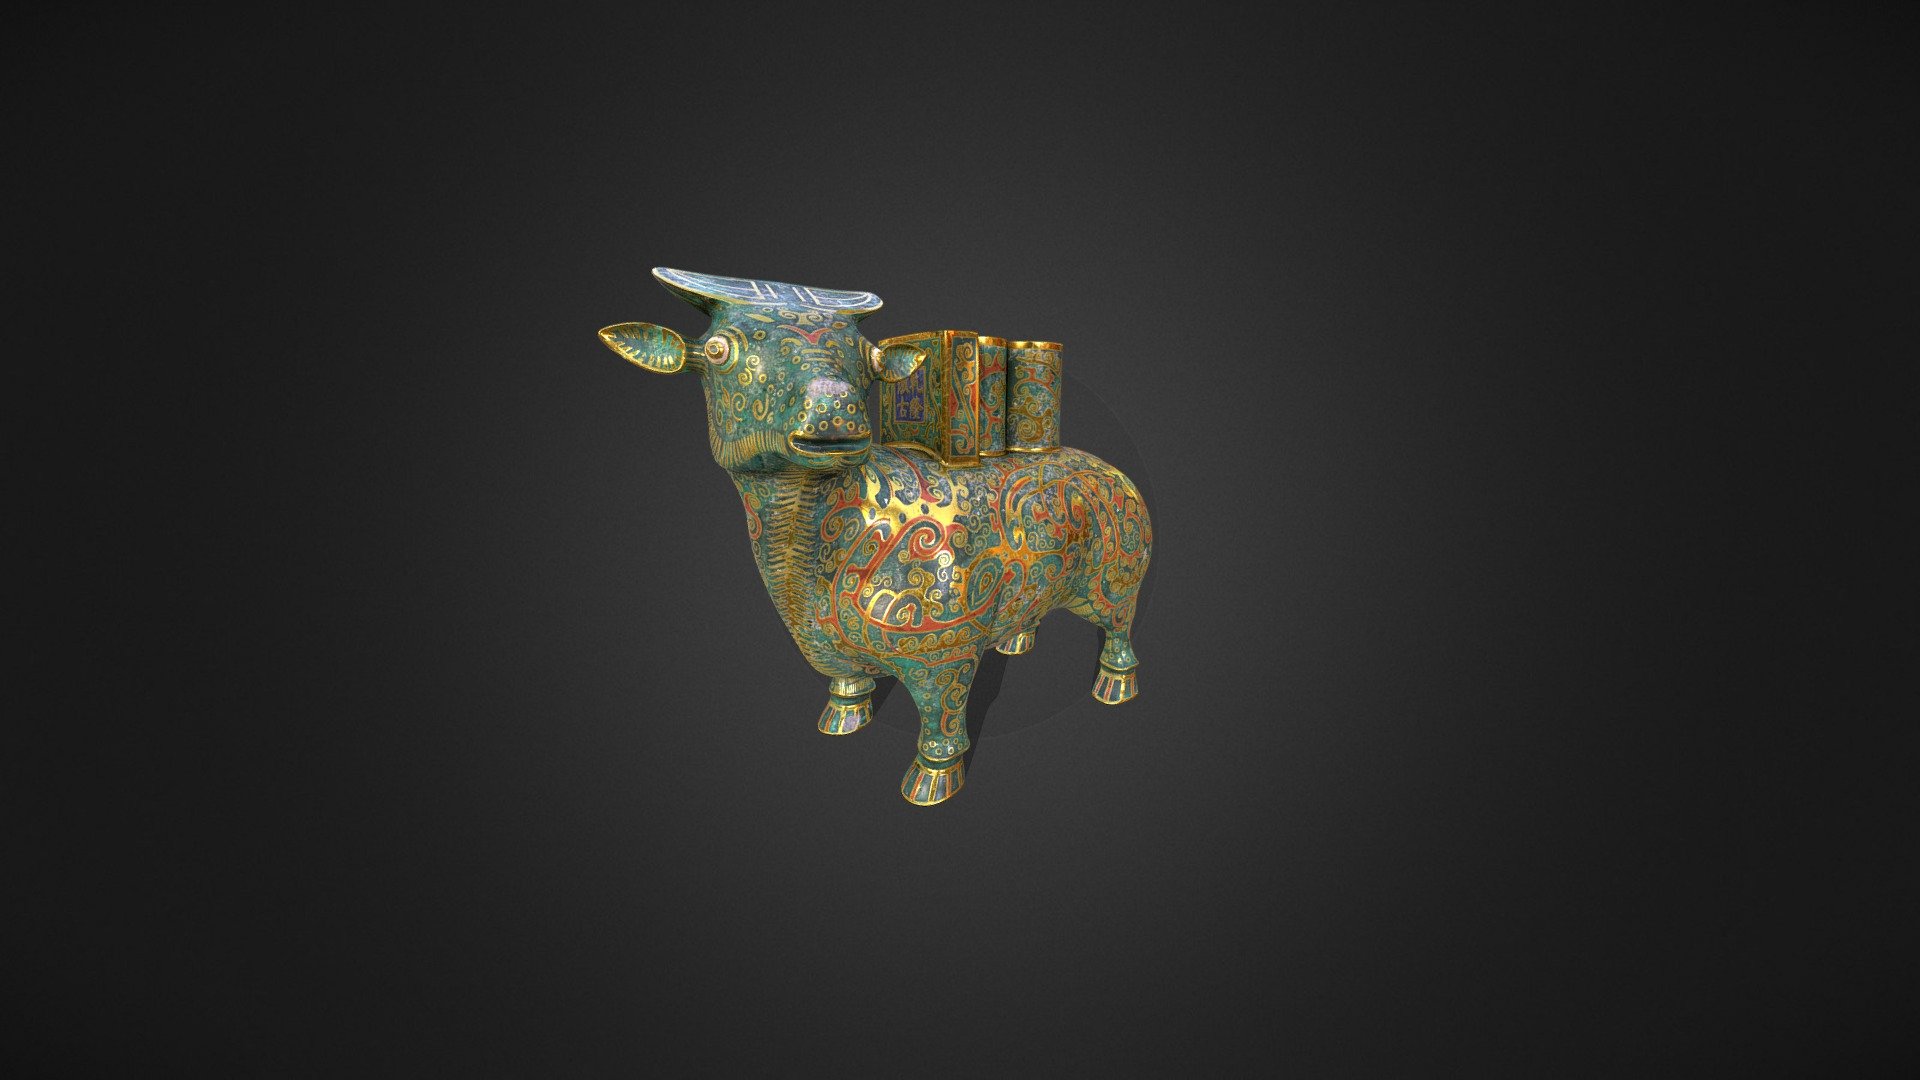 Nothing much else to do in these times, so I painted up a little ornate cow because it's got a derpy face that made me laugh, higher res pics over at artstation 

https://www.artstation.com/artwork/nQgqE6?fbclid=IwAR0zv5NBww-OK4lUGRBbaf_eUXoa3ads5AeaFJfsiap8_TI5aQnEZvTZAWc - Ornate Cow - 3D model by lewislabram 3d model